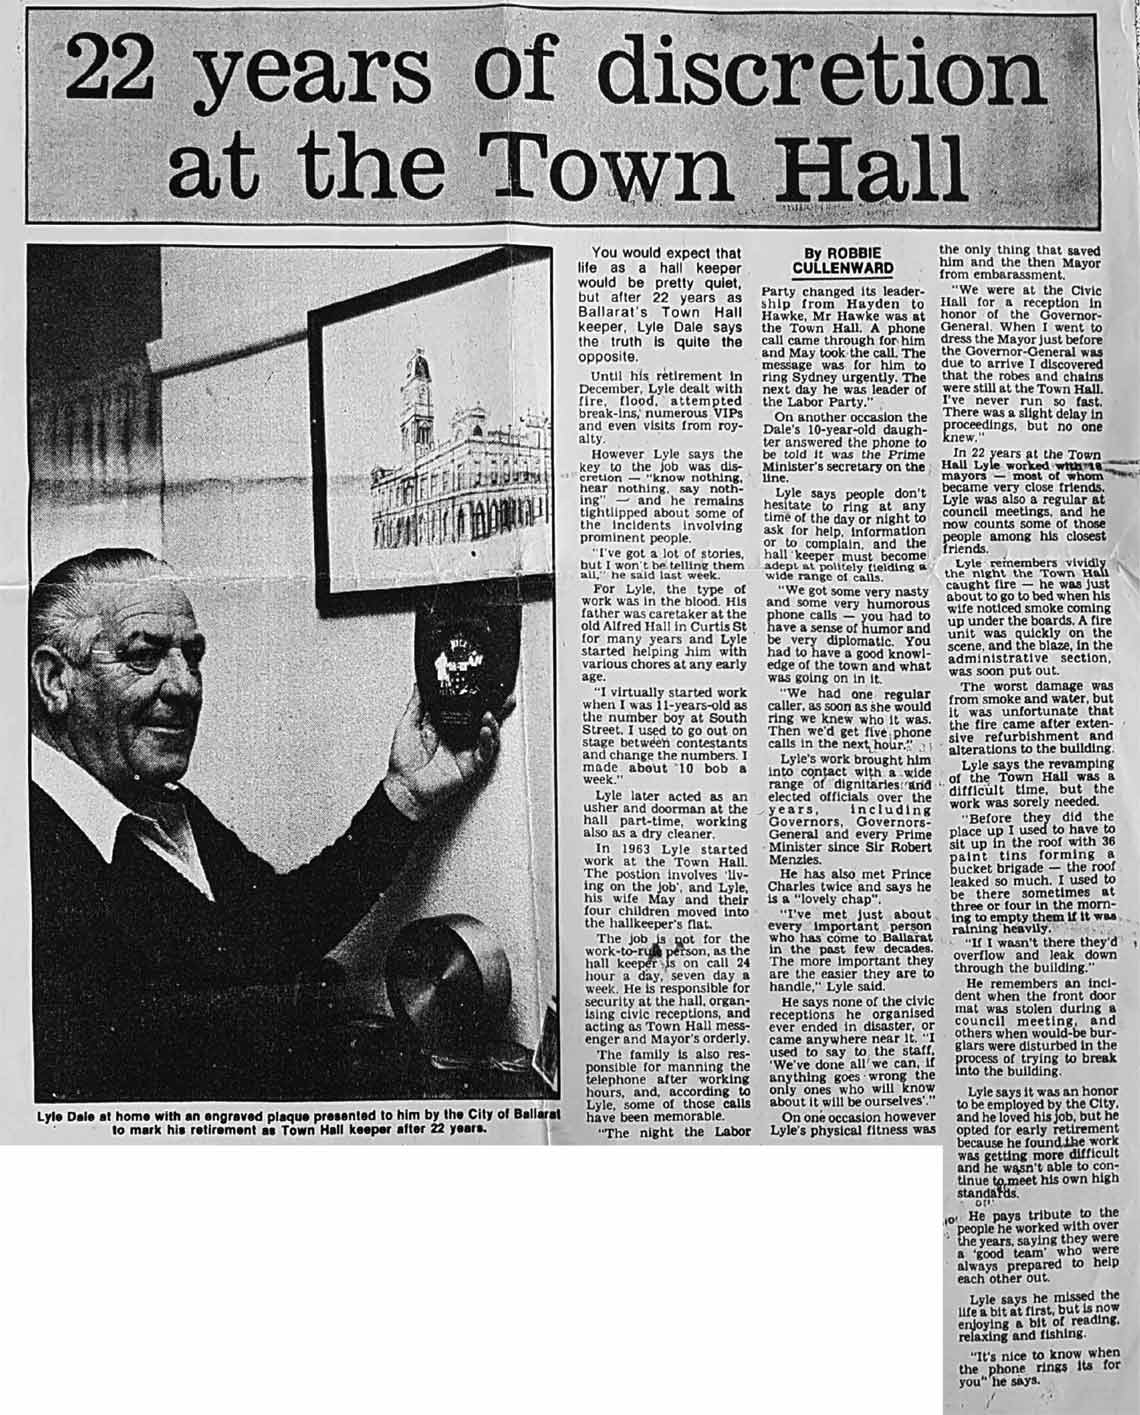 Newspaper clipping titled 22 years of Discretion at Town Hall, showing article and photograph of hallkeeper Lyle Dale